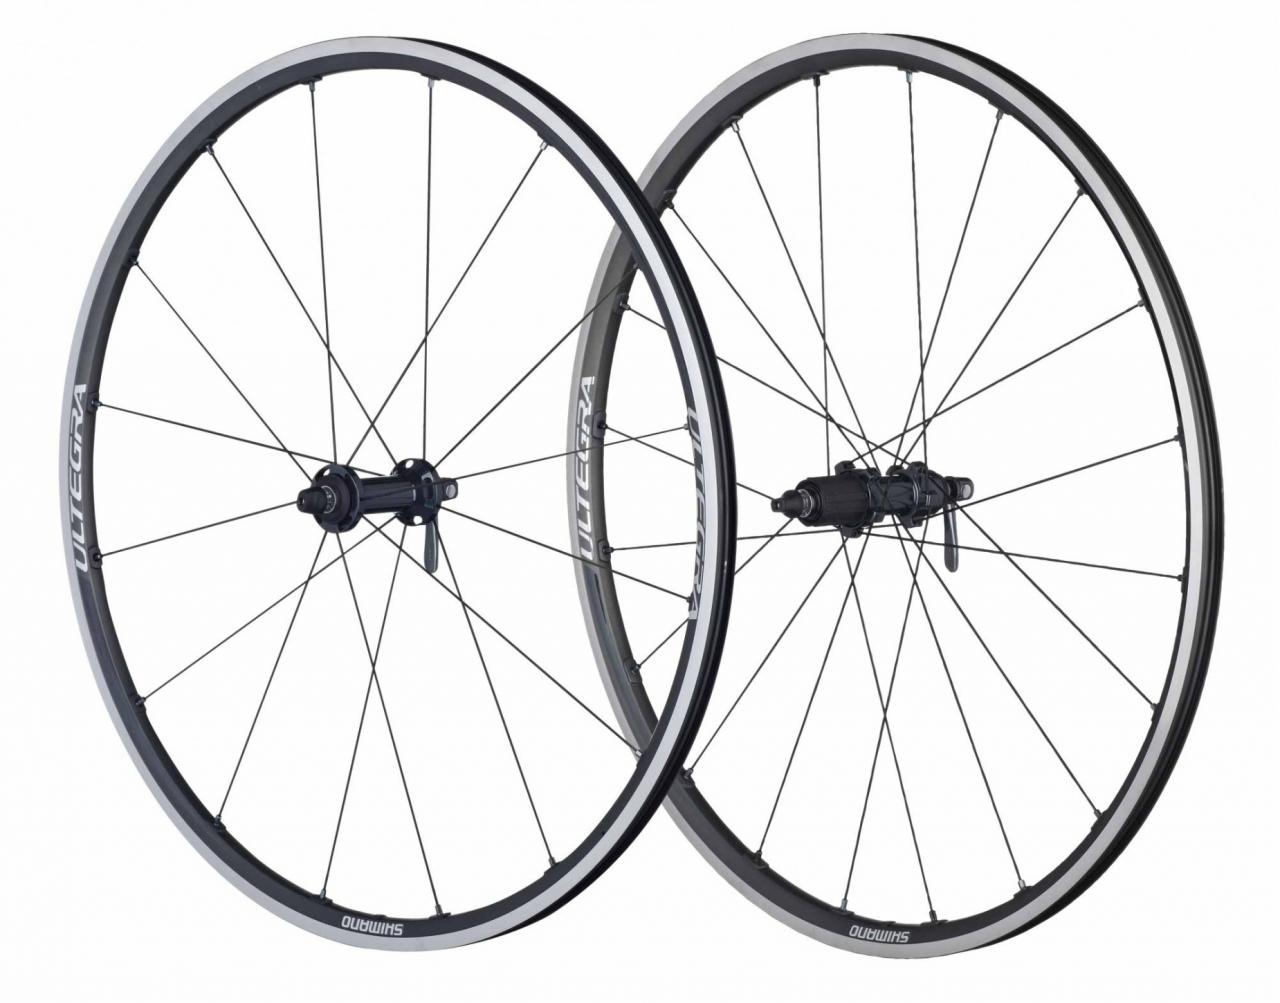 Review: Shimano WH-6800 Ultegra wheels 